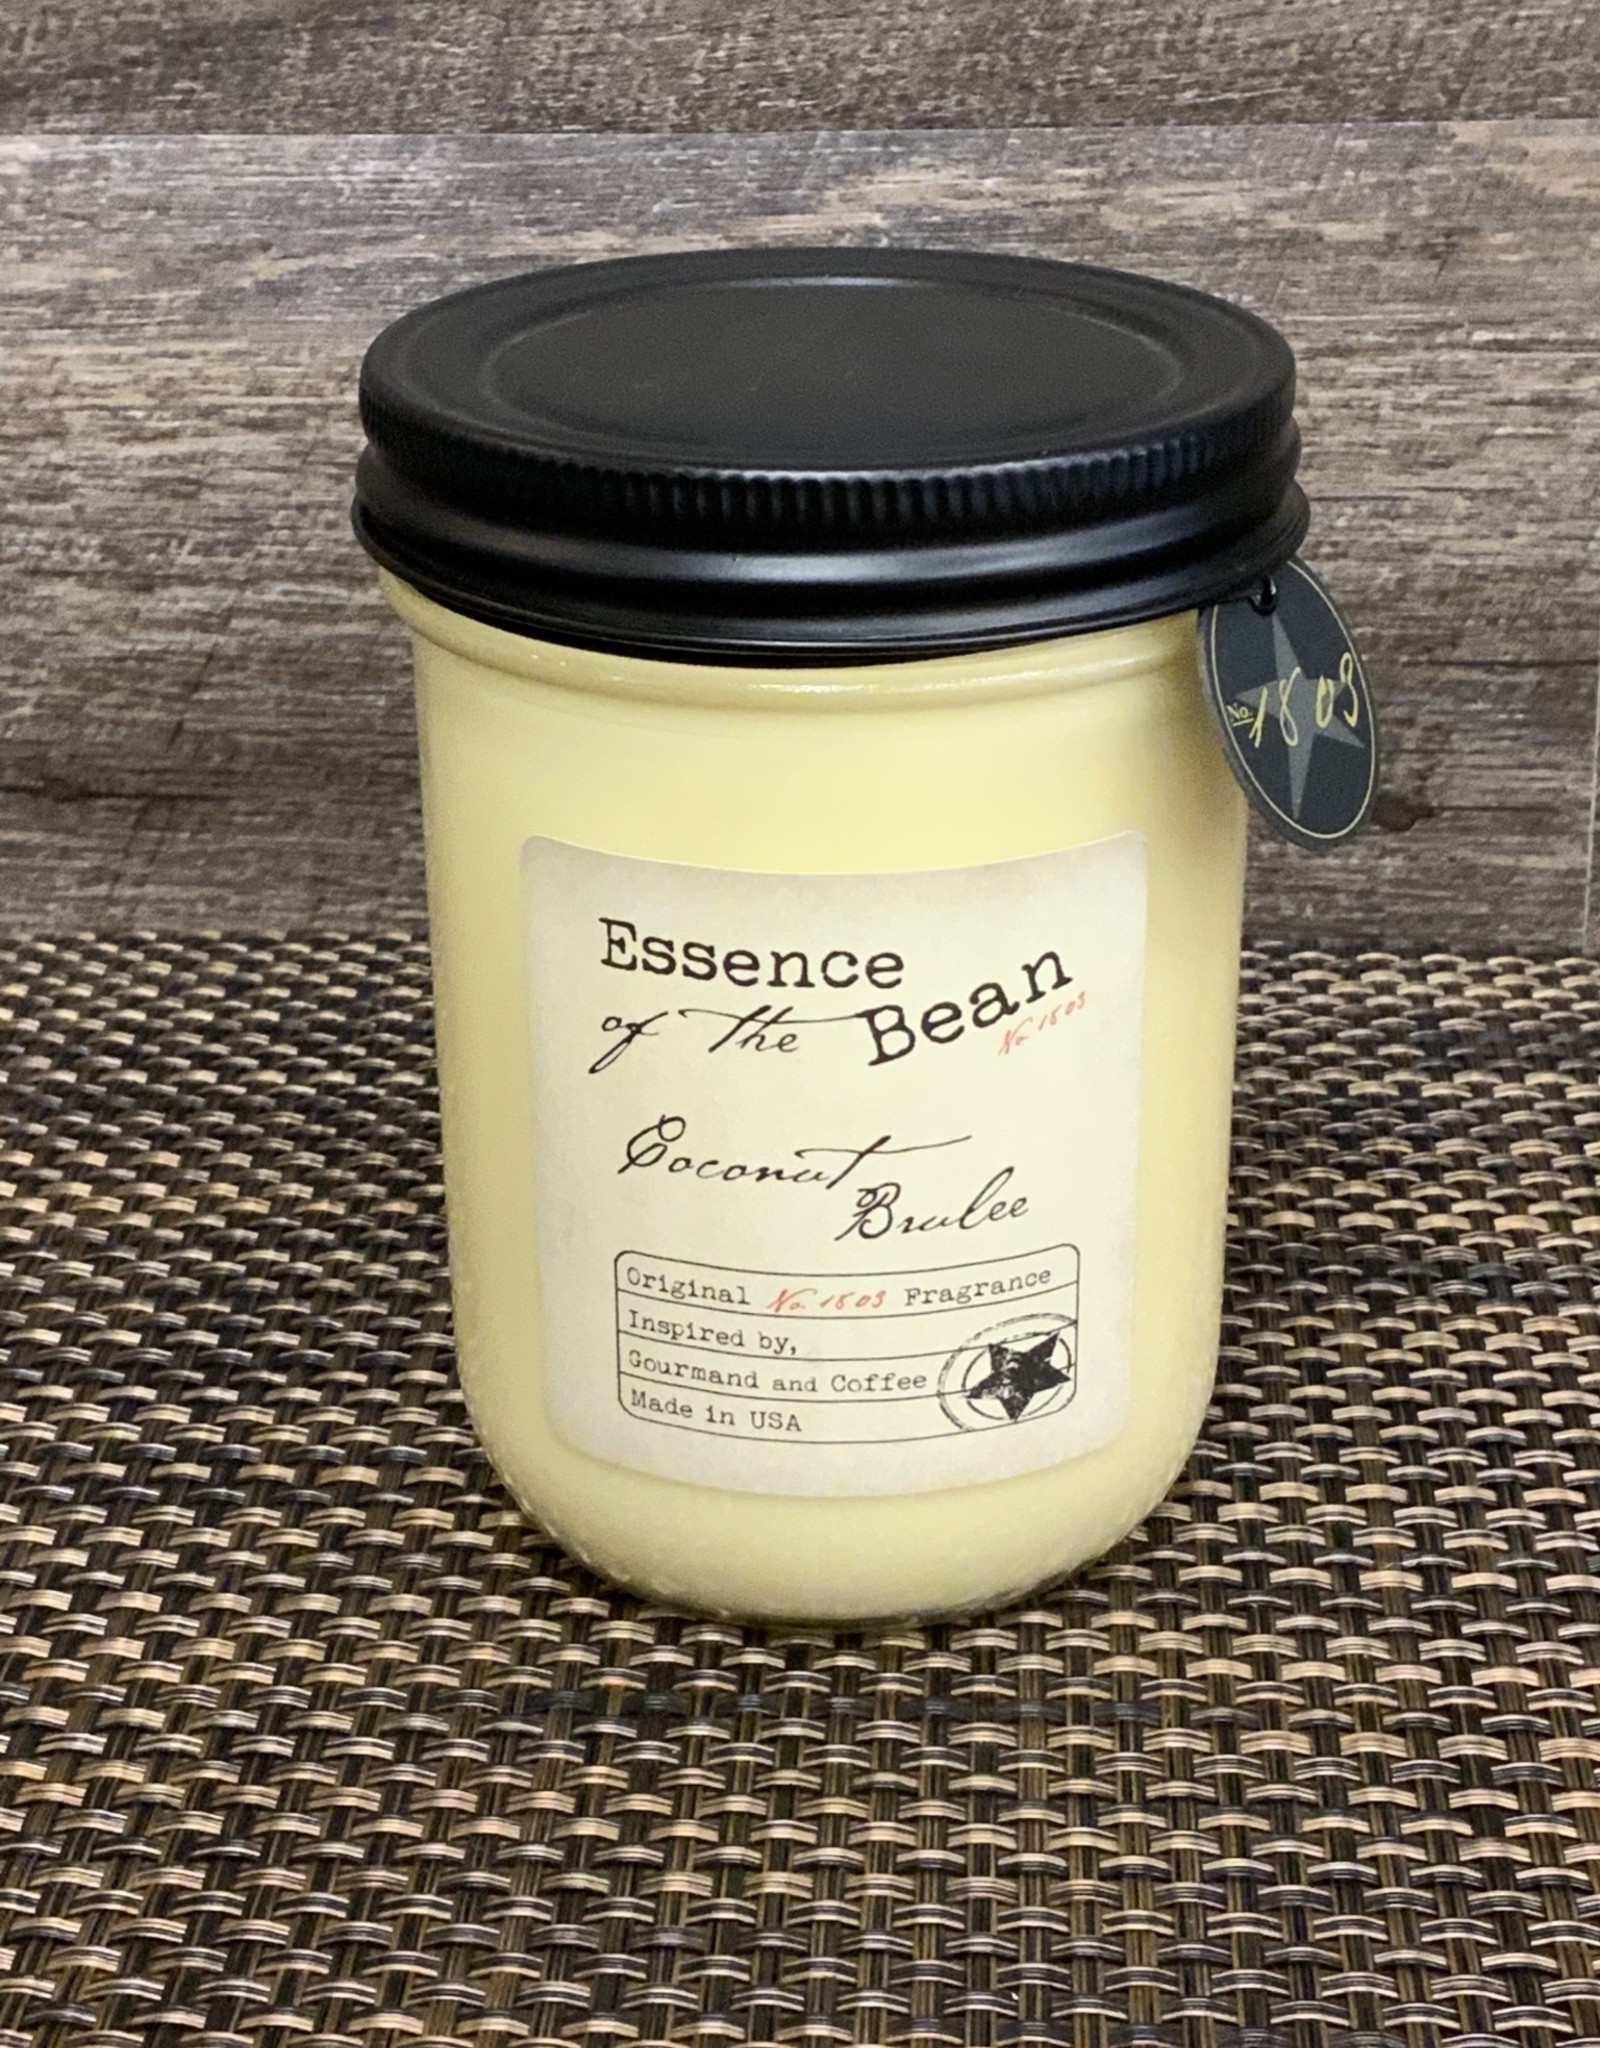 Coconut Brulee 14oz Soy Wax Candle